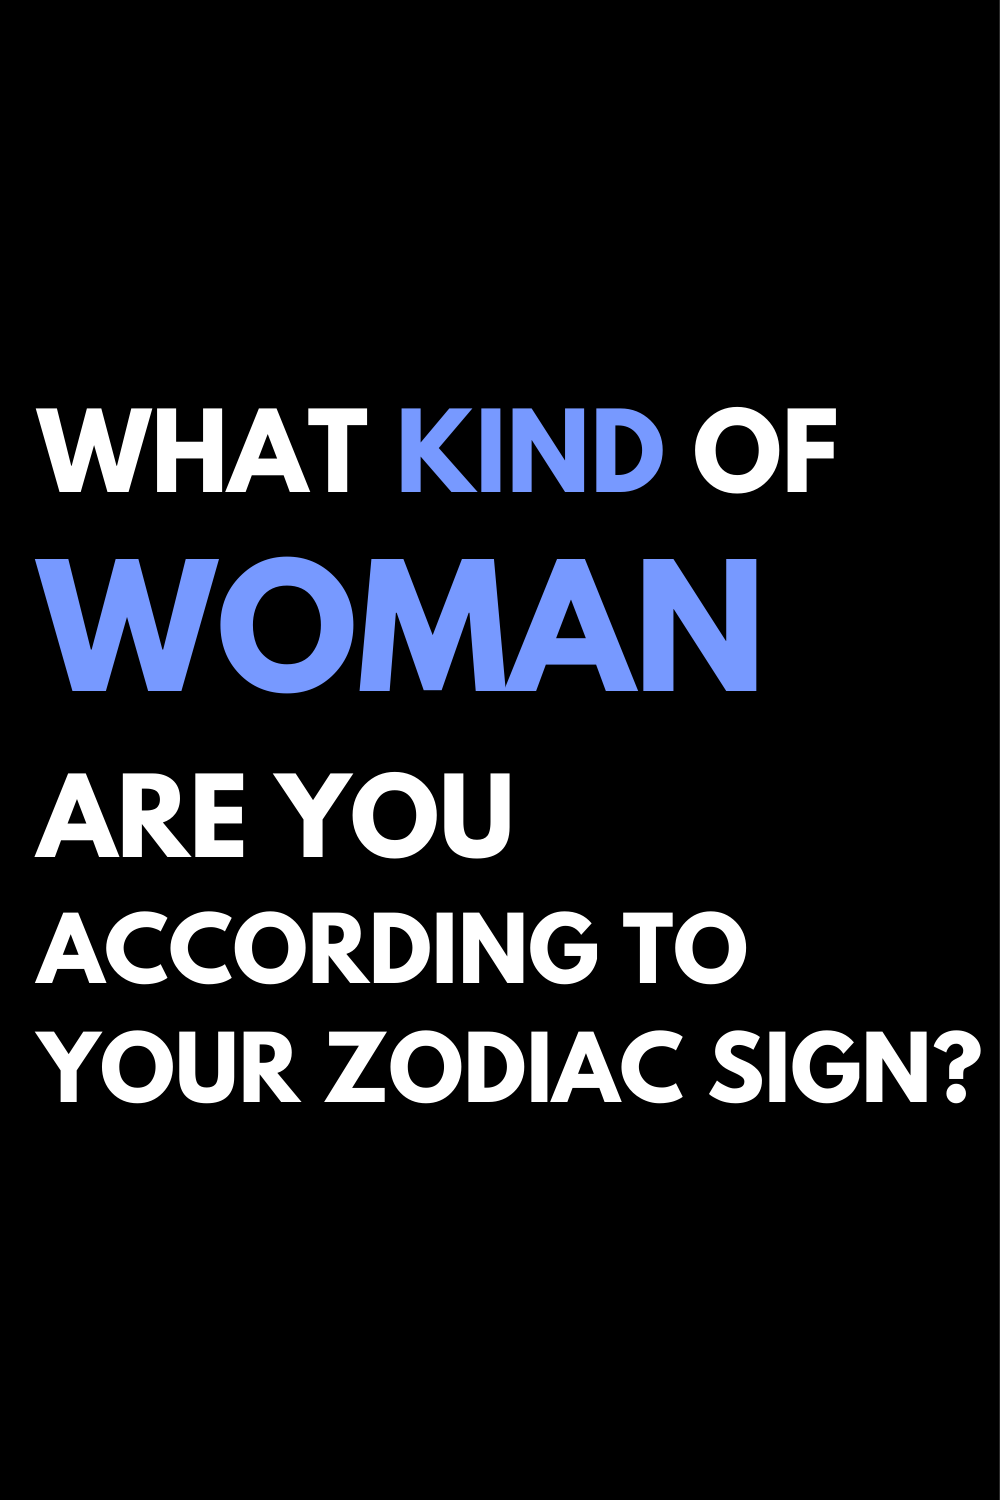 What Kind Of Woman Are You According To Your Zodiac Sign?